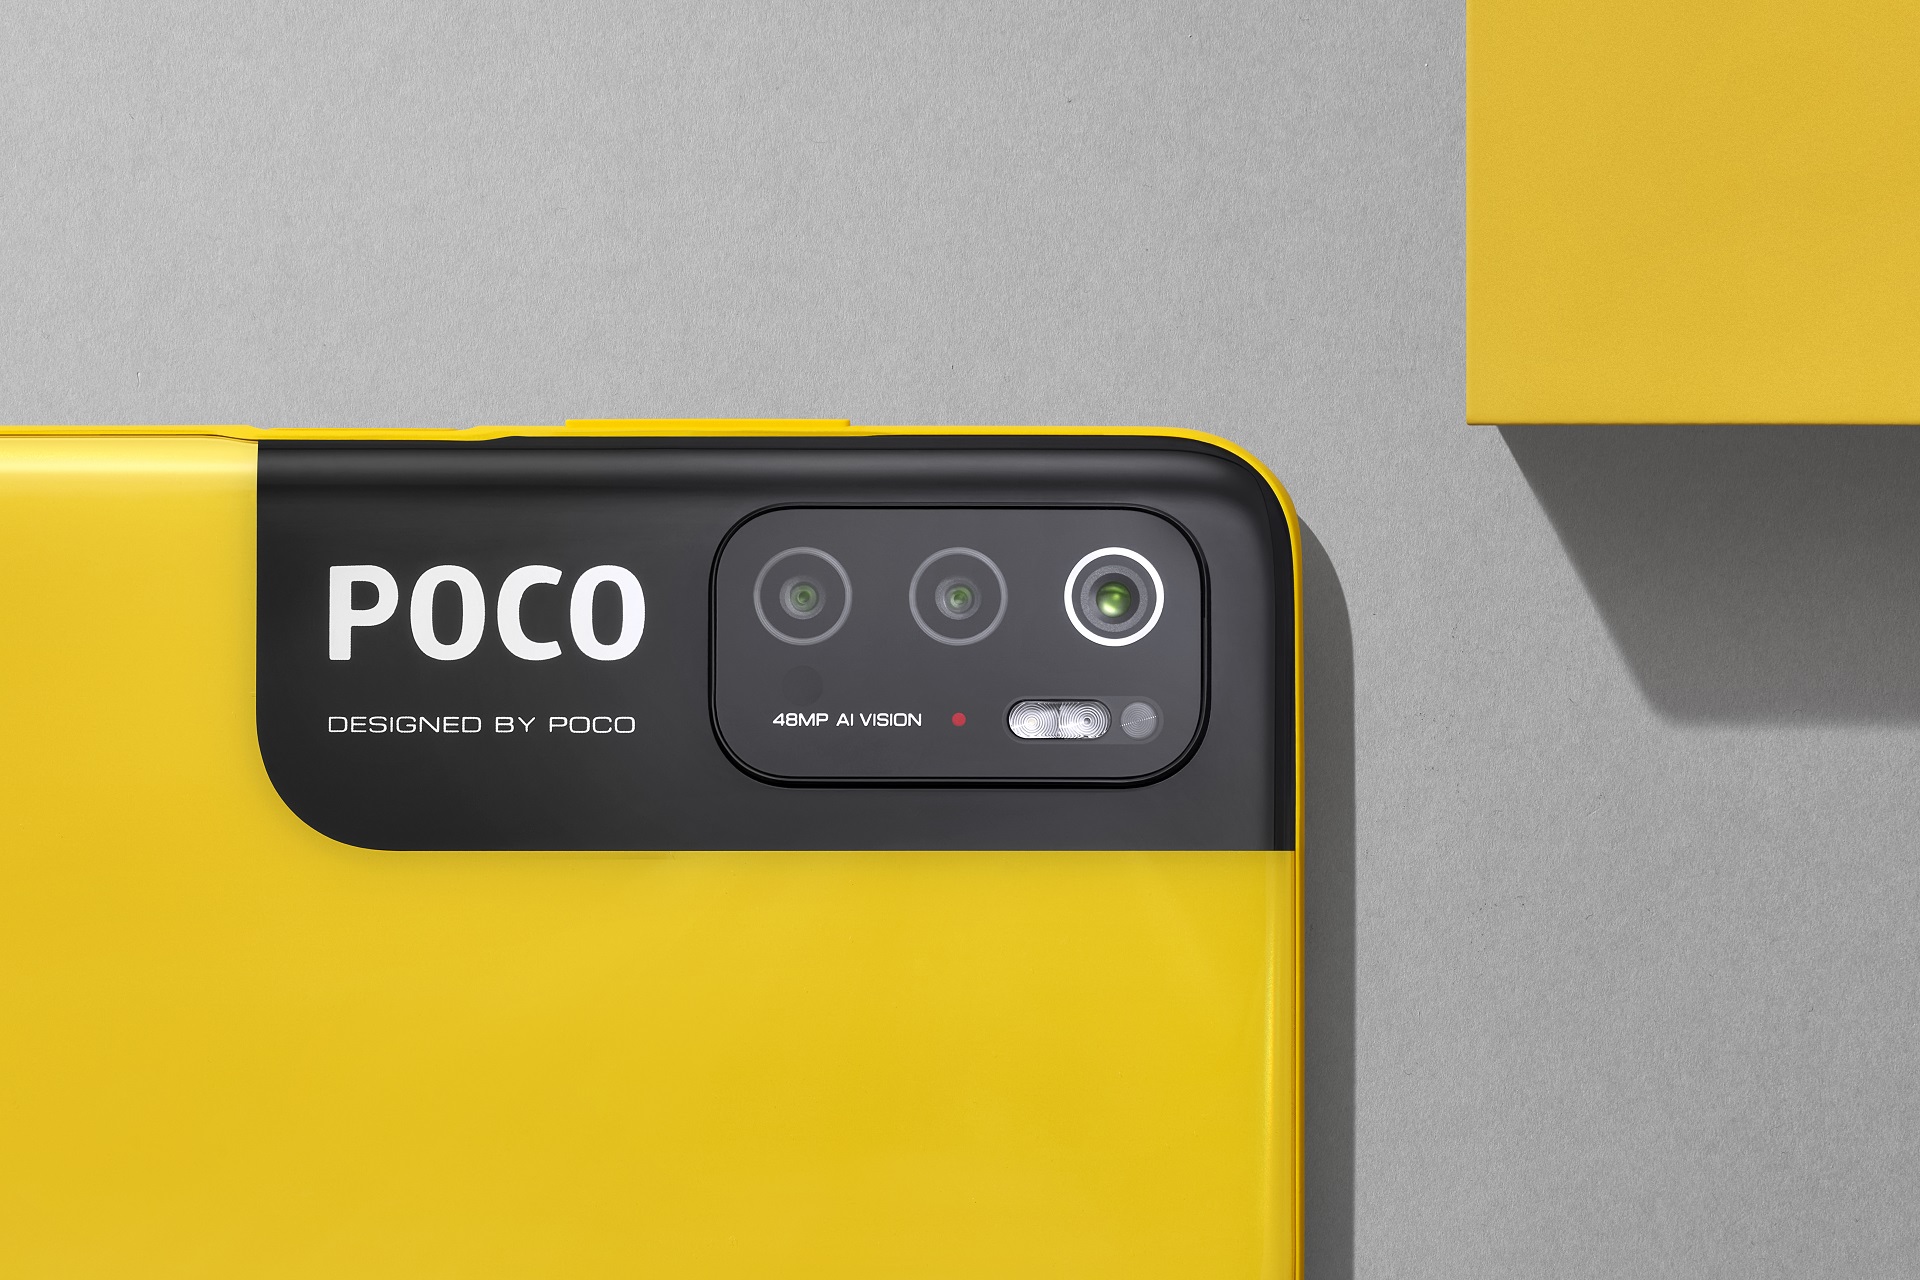 The Poco M3 Pro 5G smartphone gets a Malaysian release 